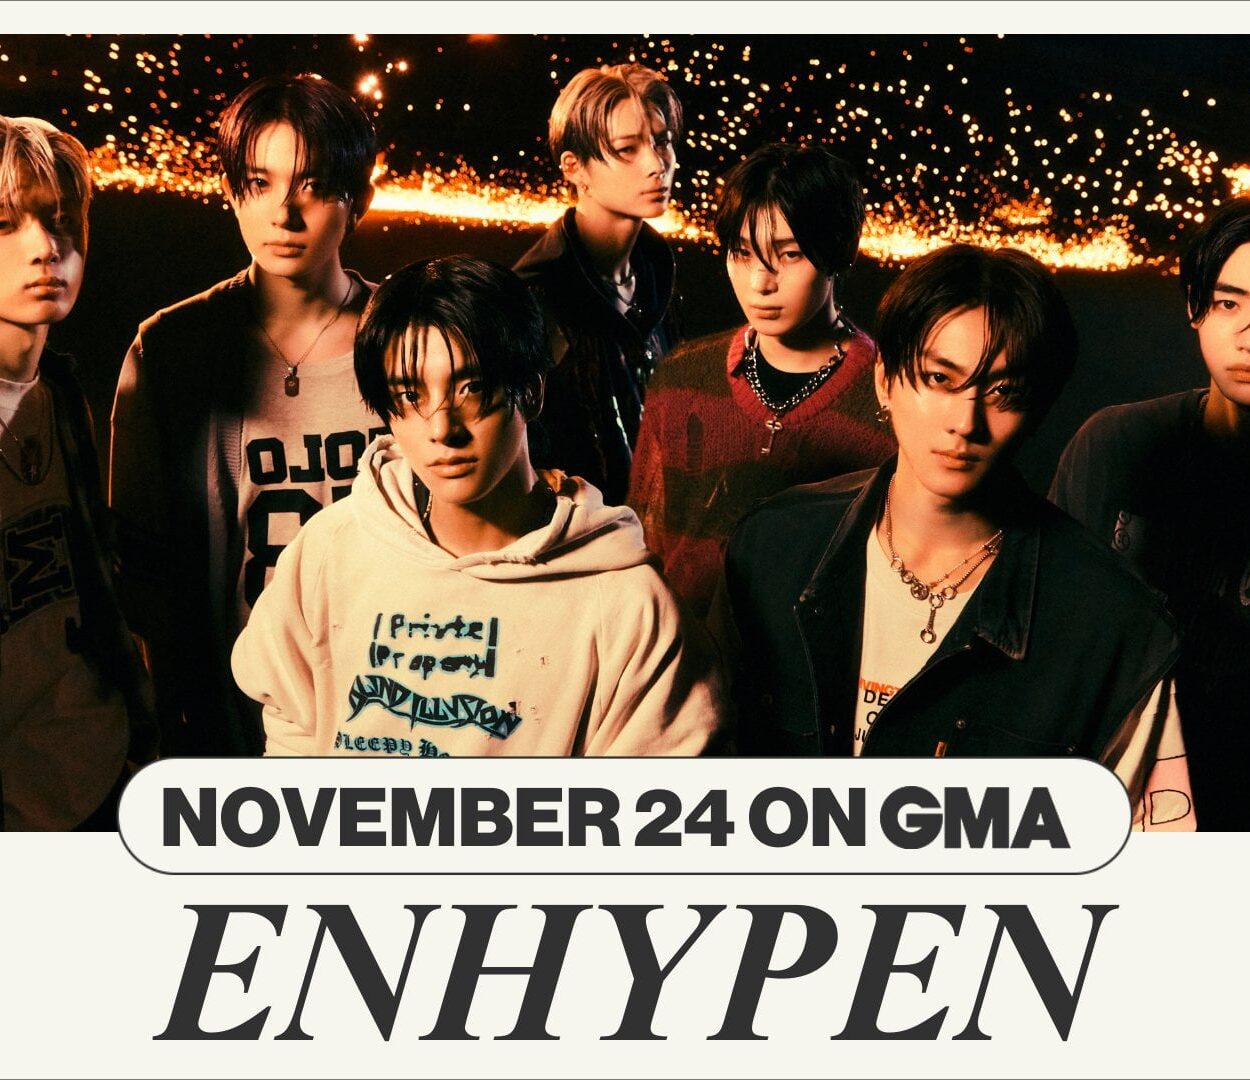 231120 ENHYPEN will perform Sweet Venom live at Times Square on Good Morning America this Friday 11.24.